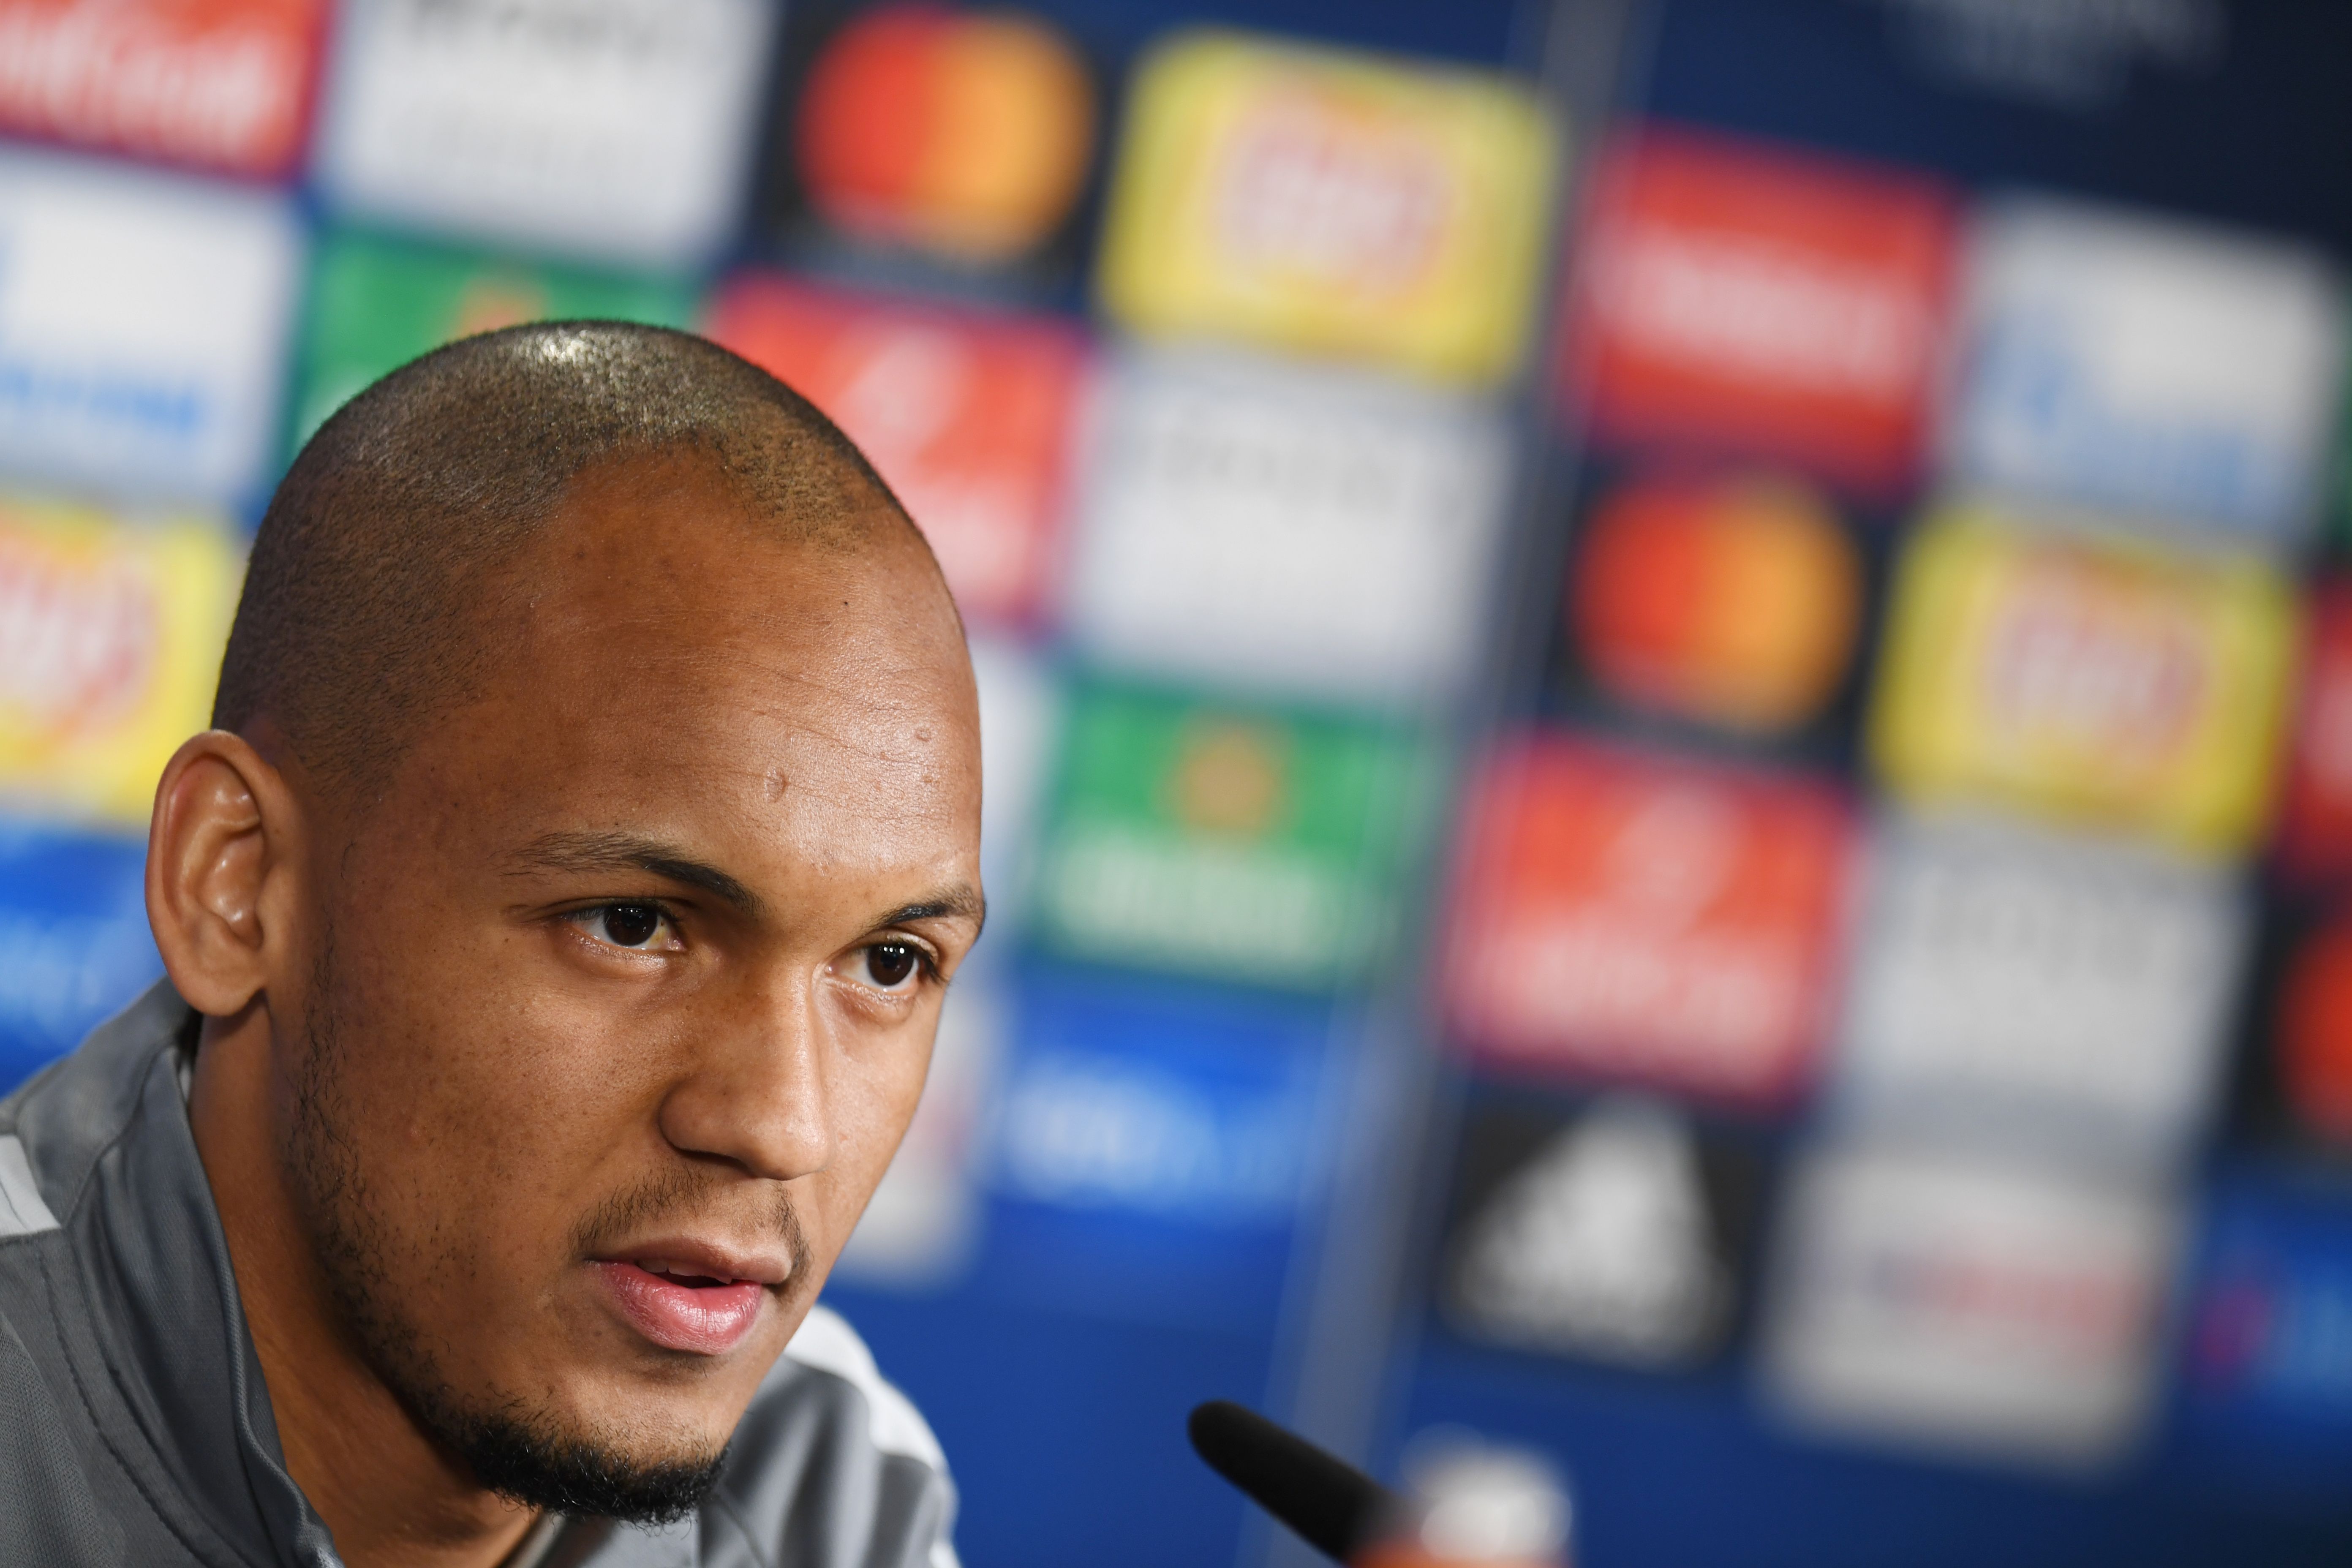 Monaco's Brazilian defender Fabinho answers questions during a press conference in Dortmund, on April 10, 2017 on the eve of the Champions League football match between Borussia Dortmund and AS Monaco. / AFP PHOTO / PATRIK STOLLARZ        (Photo credit should read PATRIK STOLLARZ/AFP/Getty Images)